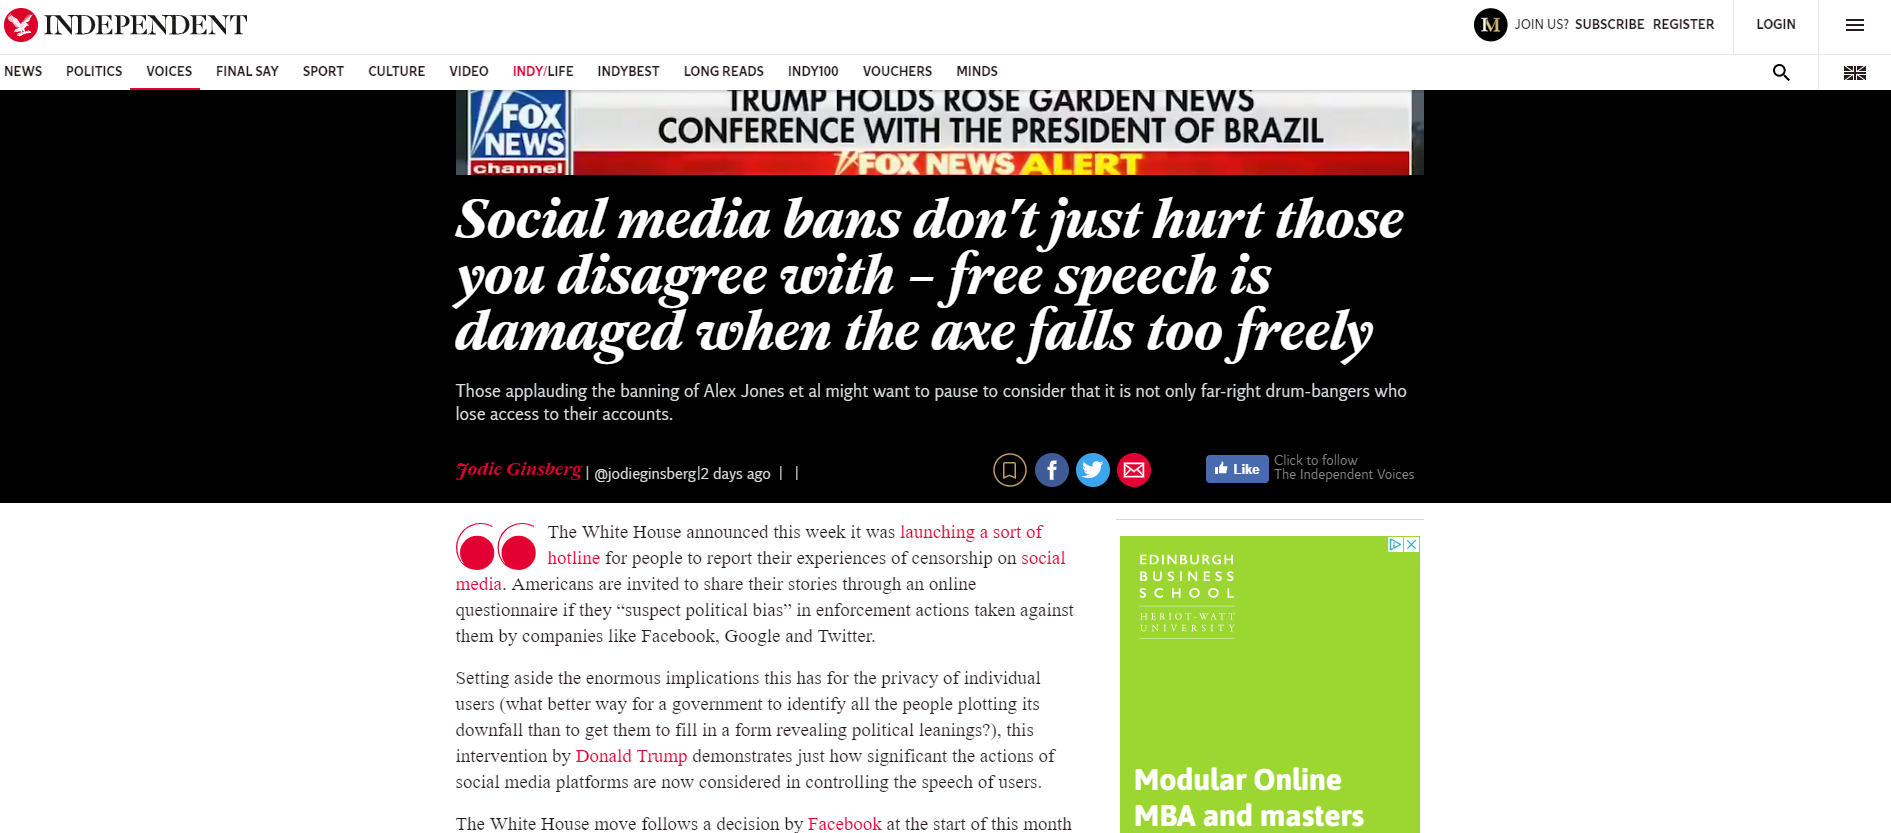 Social media bans don’t just hurt those you disagree with – free speech is damaged when the axe falls too freely (Independent, 17 May 2019)